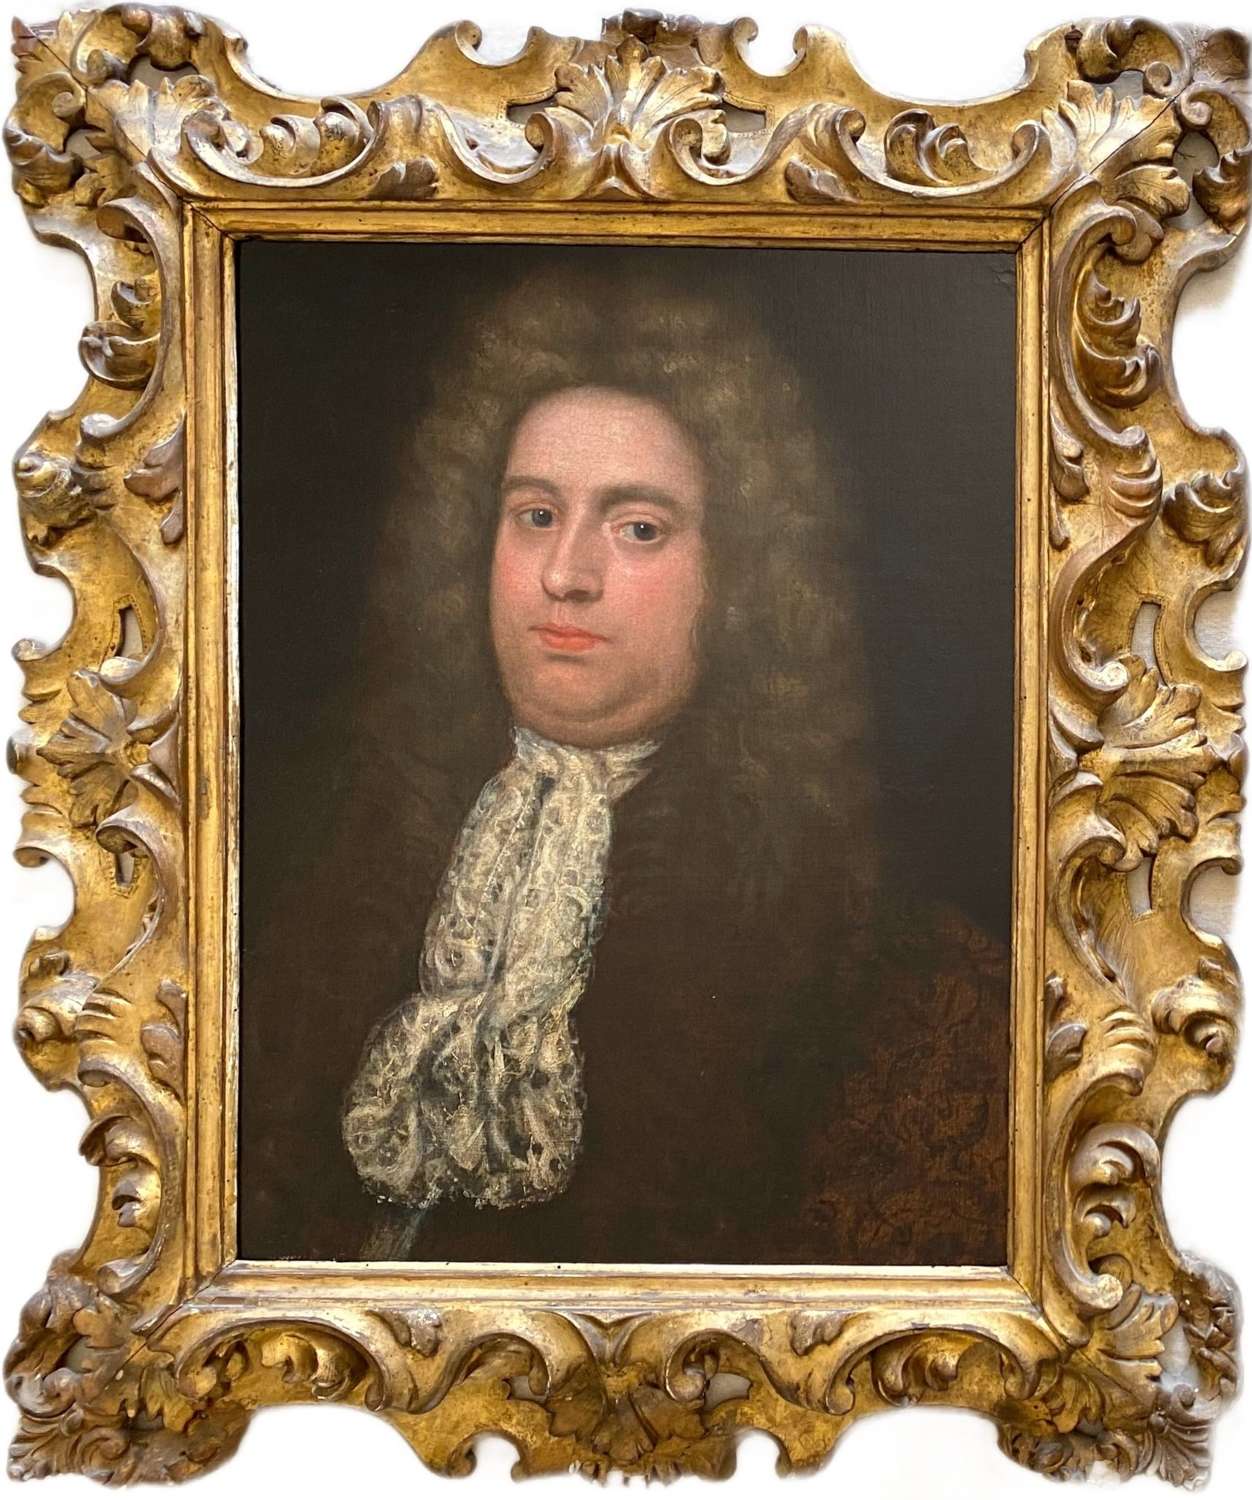 17th Century English Portrait: Admiral Nelson's great grandfather